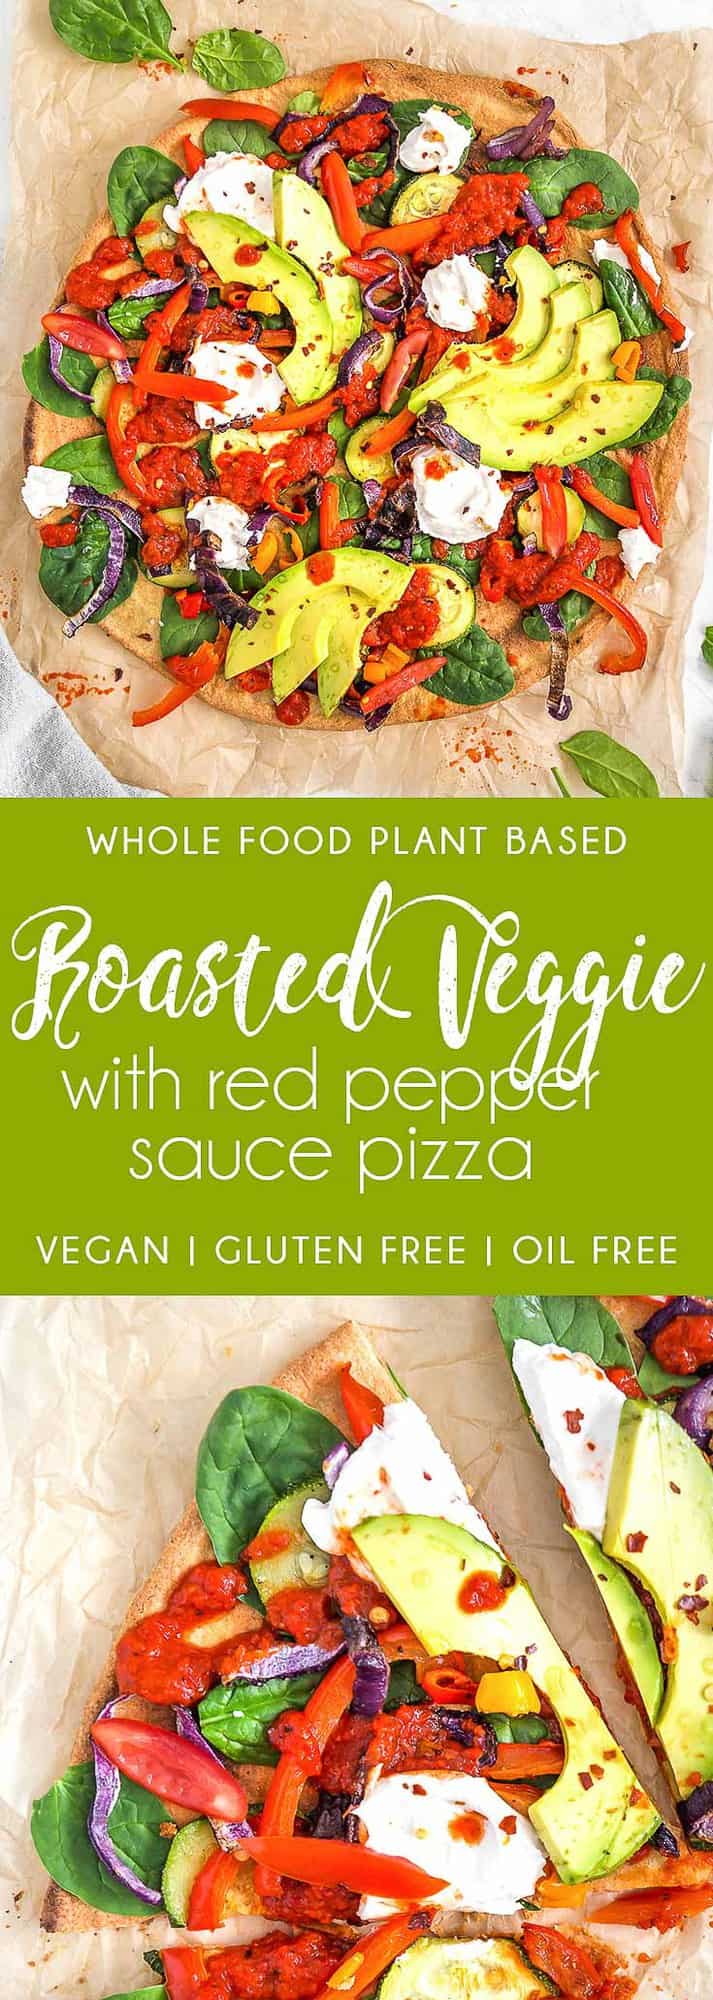 Roasted Veggie with Red Pepper Sauce Pizza, roasted vegetables, vegetables, red pepper sauce, pizza, plant based, vegan, vegetarian, whole food plant based, gluten free, recipe, wfpb, healthy, healthy vegan, oil free, no refined sugar, no oil, refined sugar free, dairy free, dinner, lunch, veggies, vegan pizza